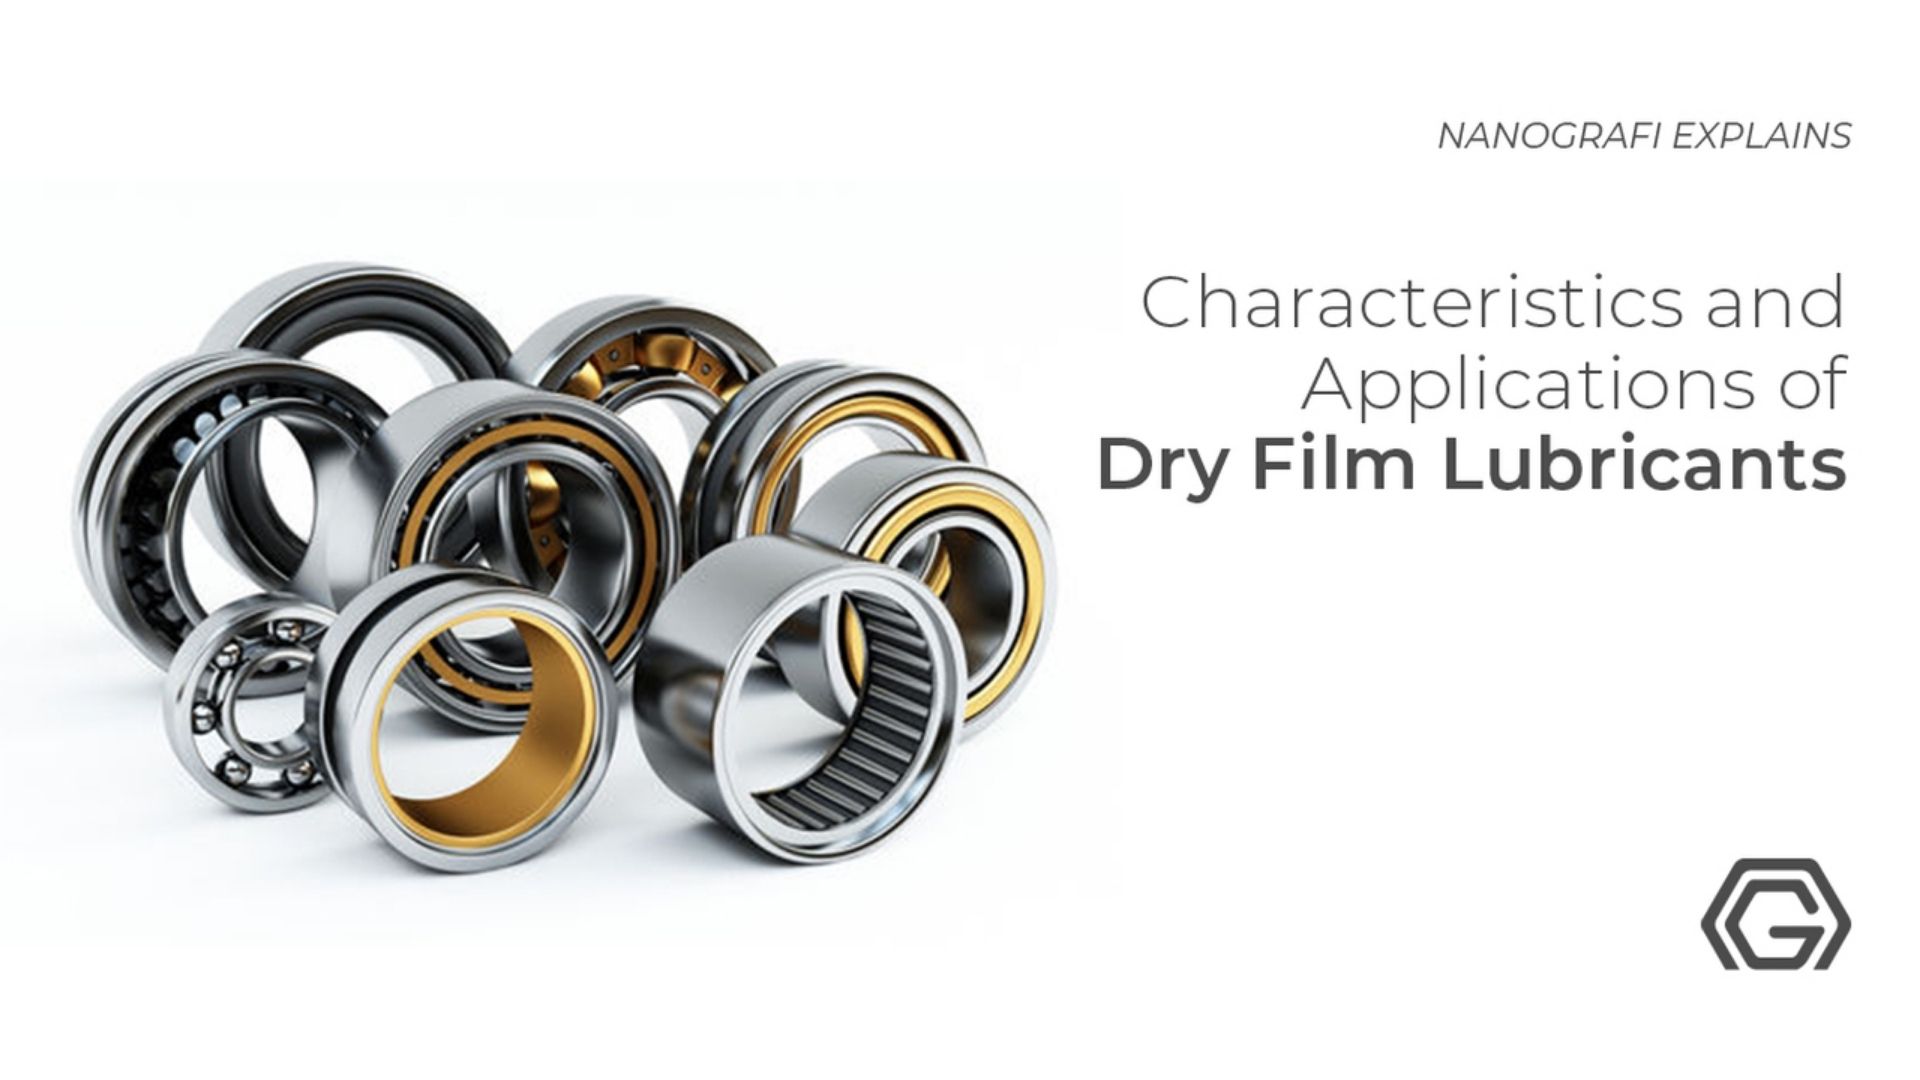 Find out Dry Film Lubricants Applications